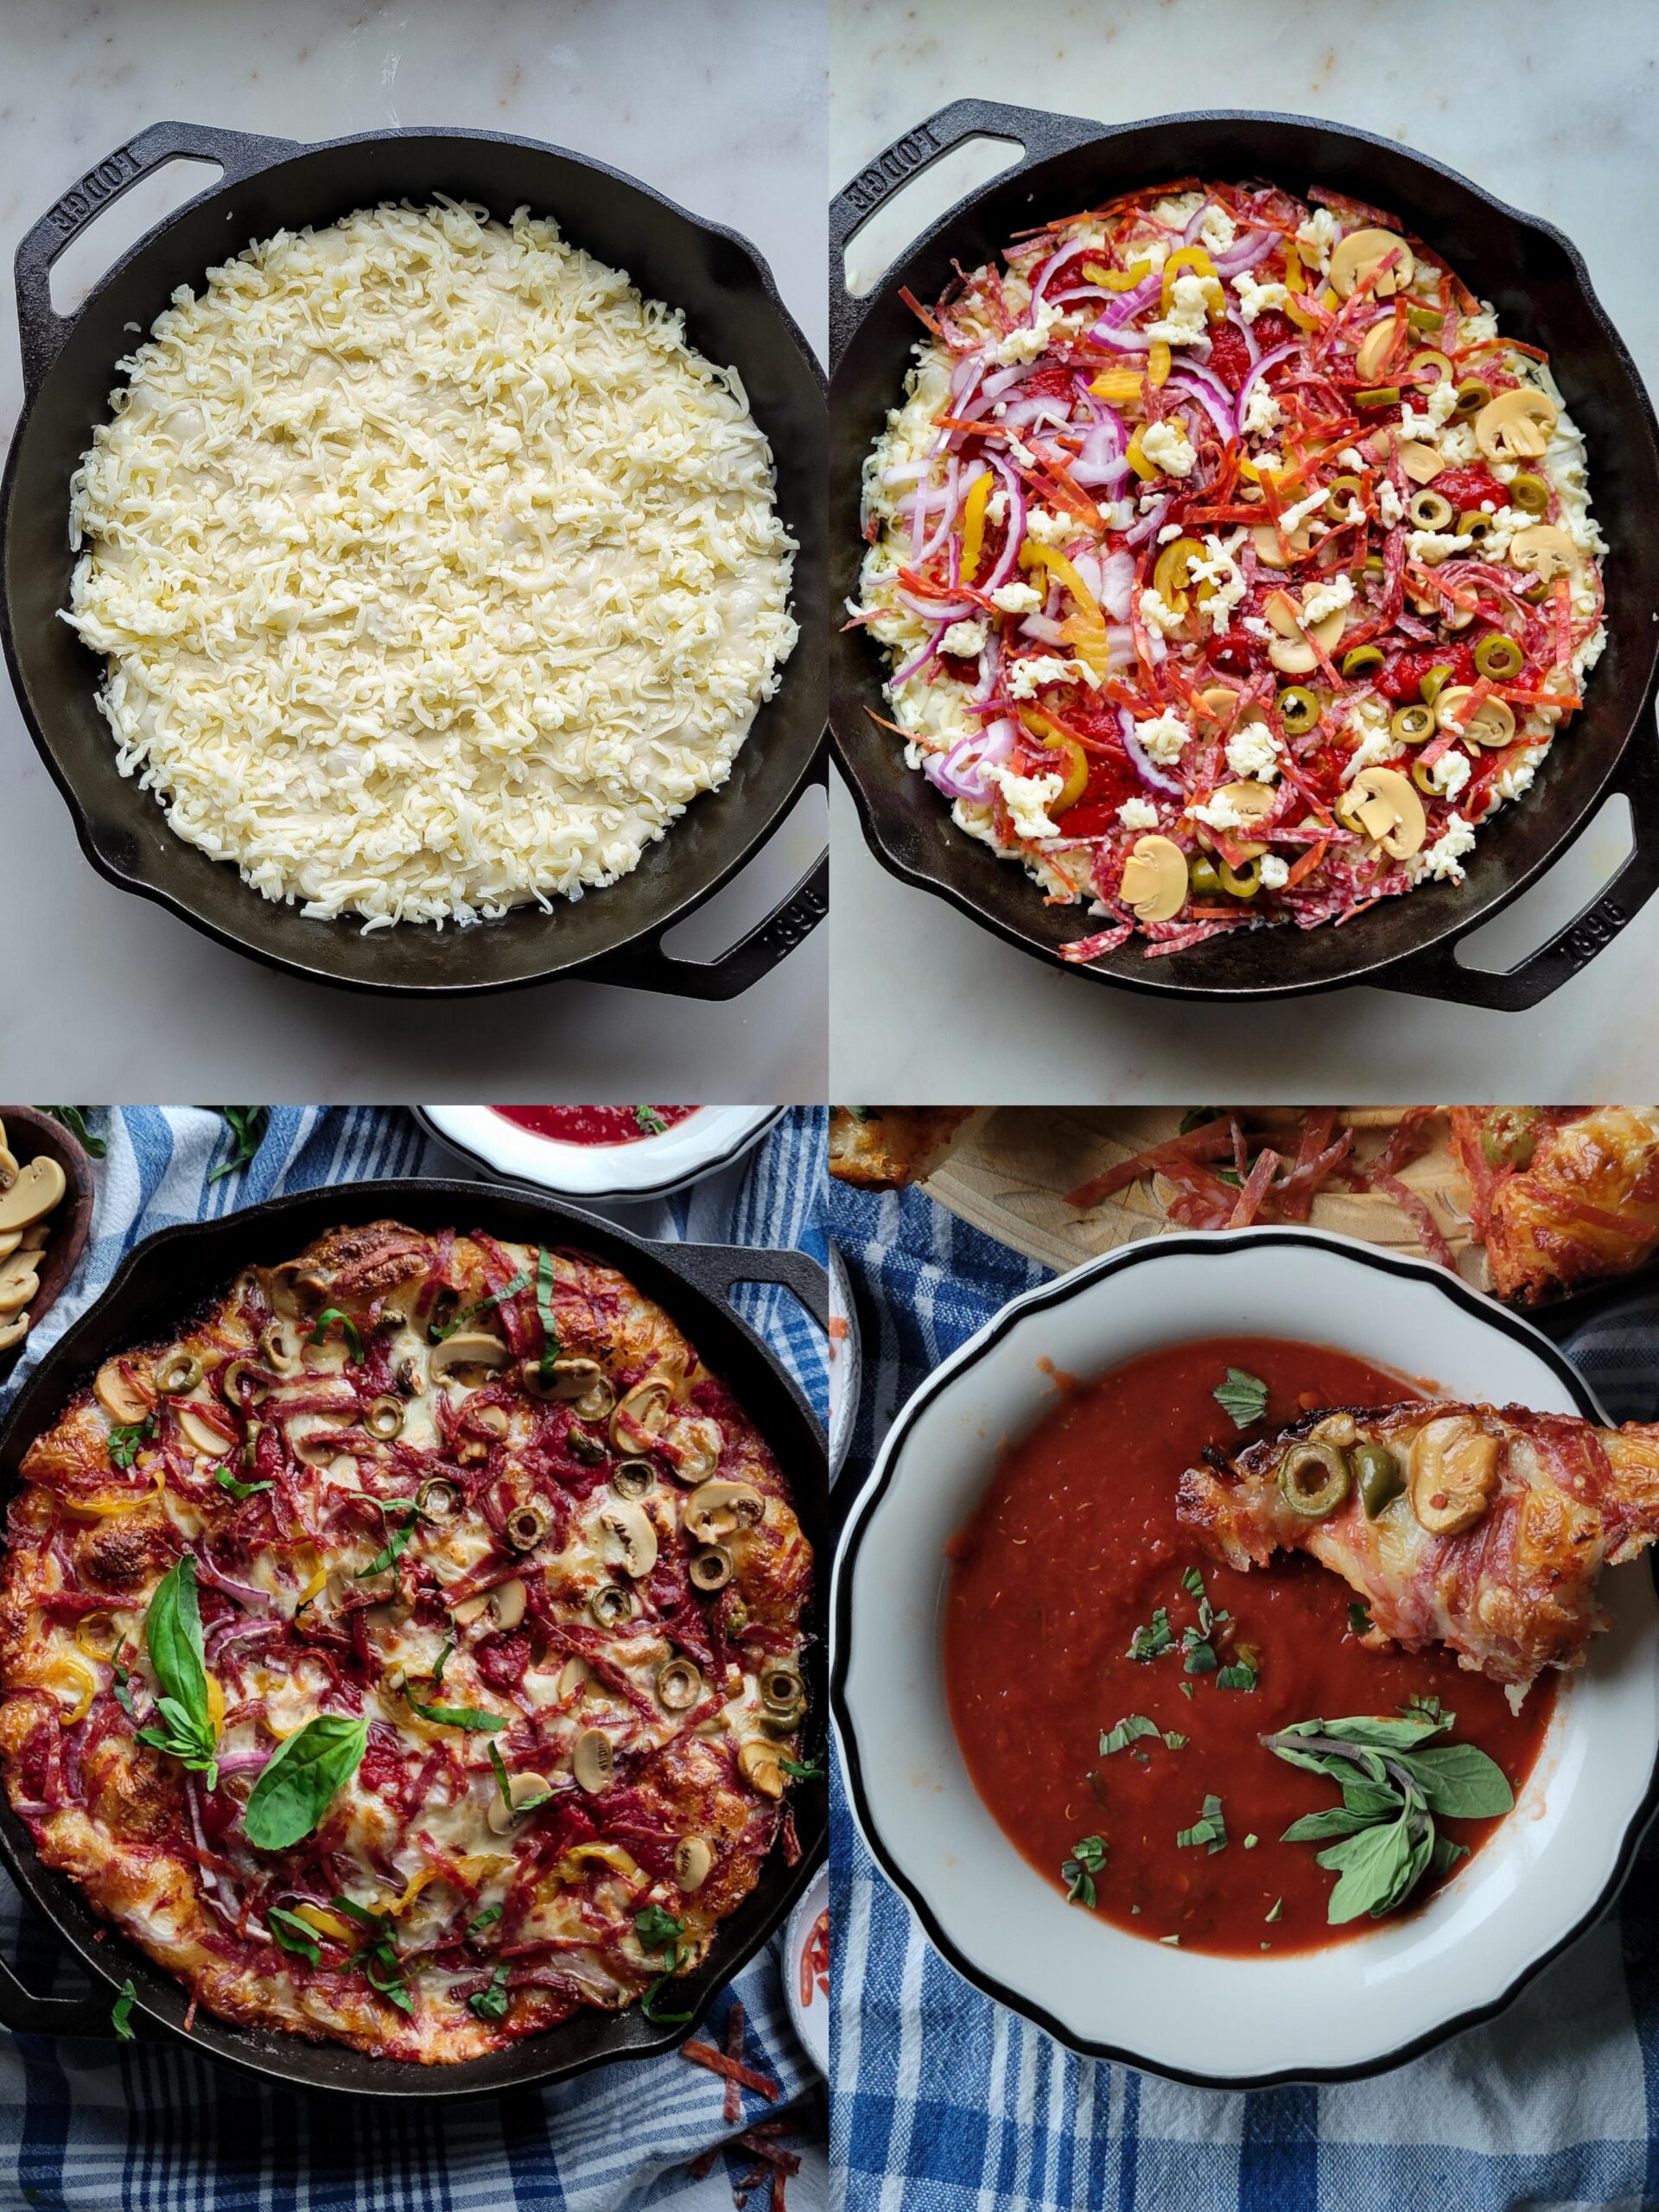 Collage showing the making of a Windsor Style Skillet Pizza.